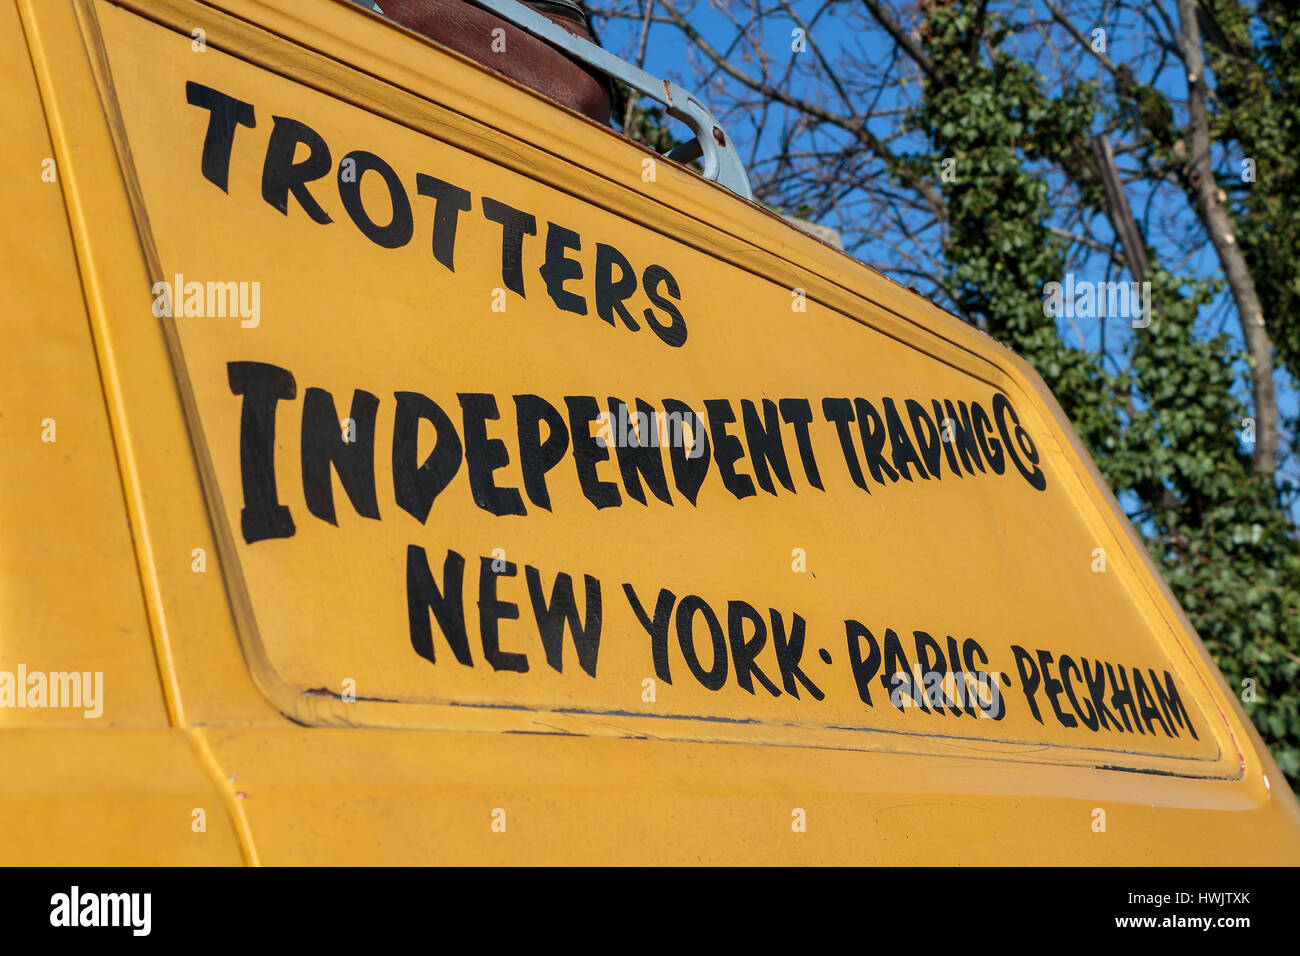 ZAGREB, CROATIA - MARCH 07, 2015: Trotters Independent Traders sign on reliant regal as used in Only Fools and Horses. Only Fools and Horses is a Brit Stock Photo